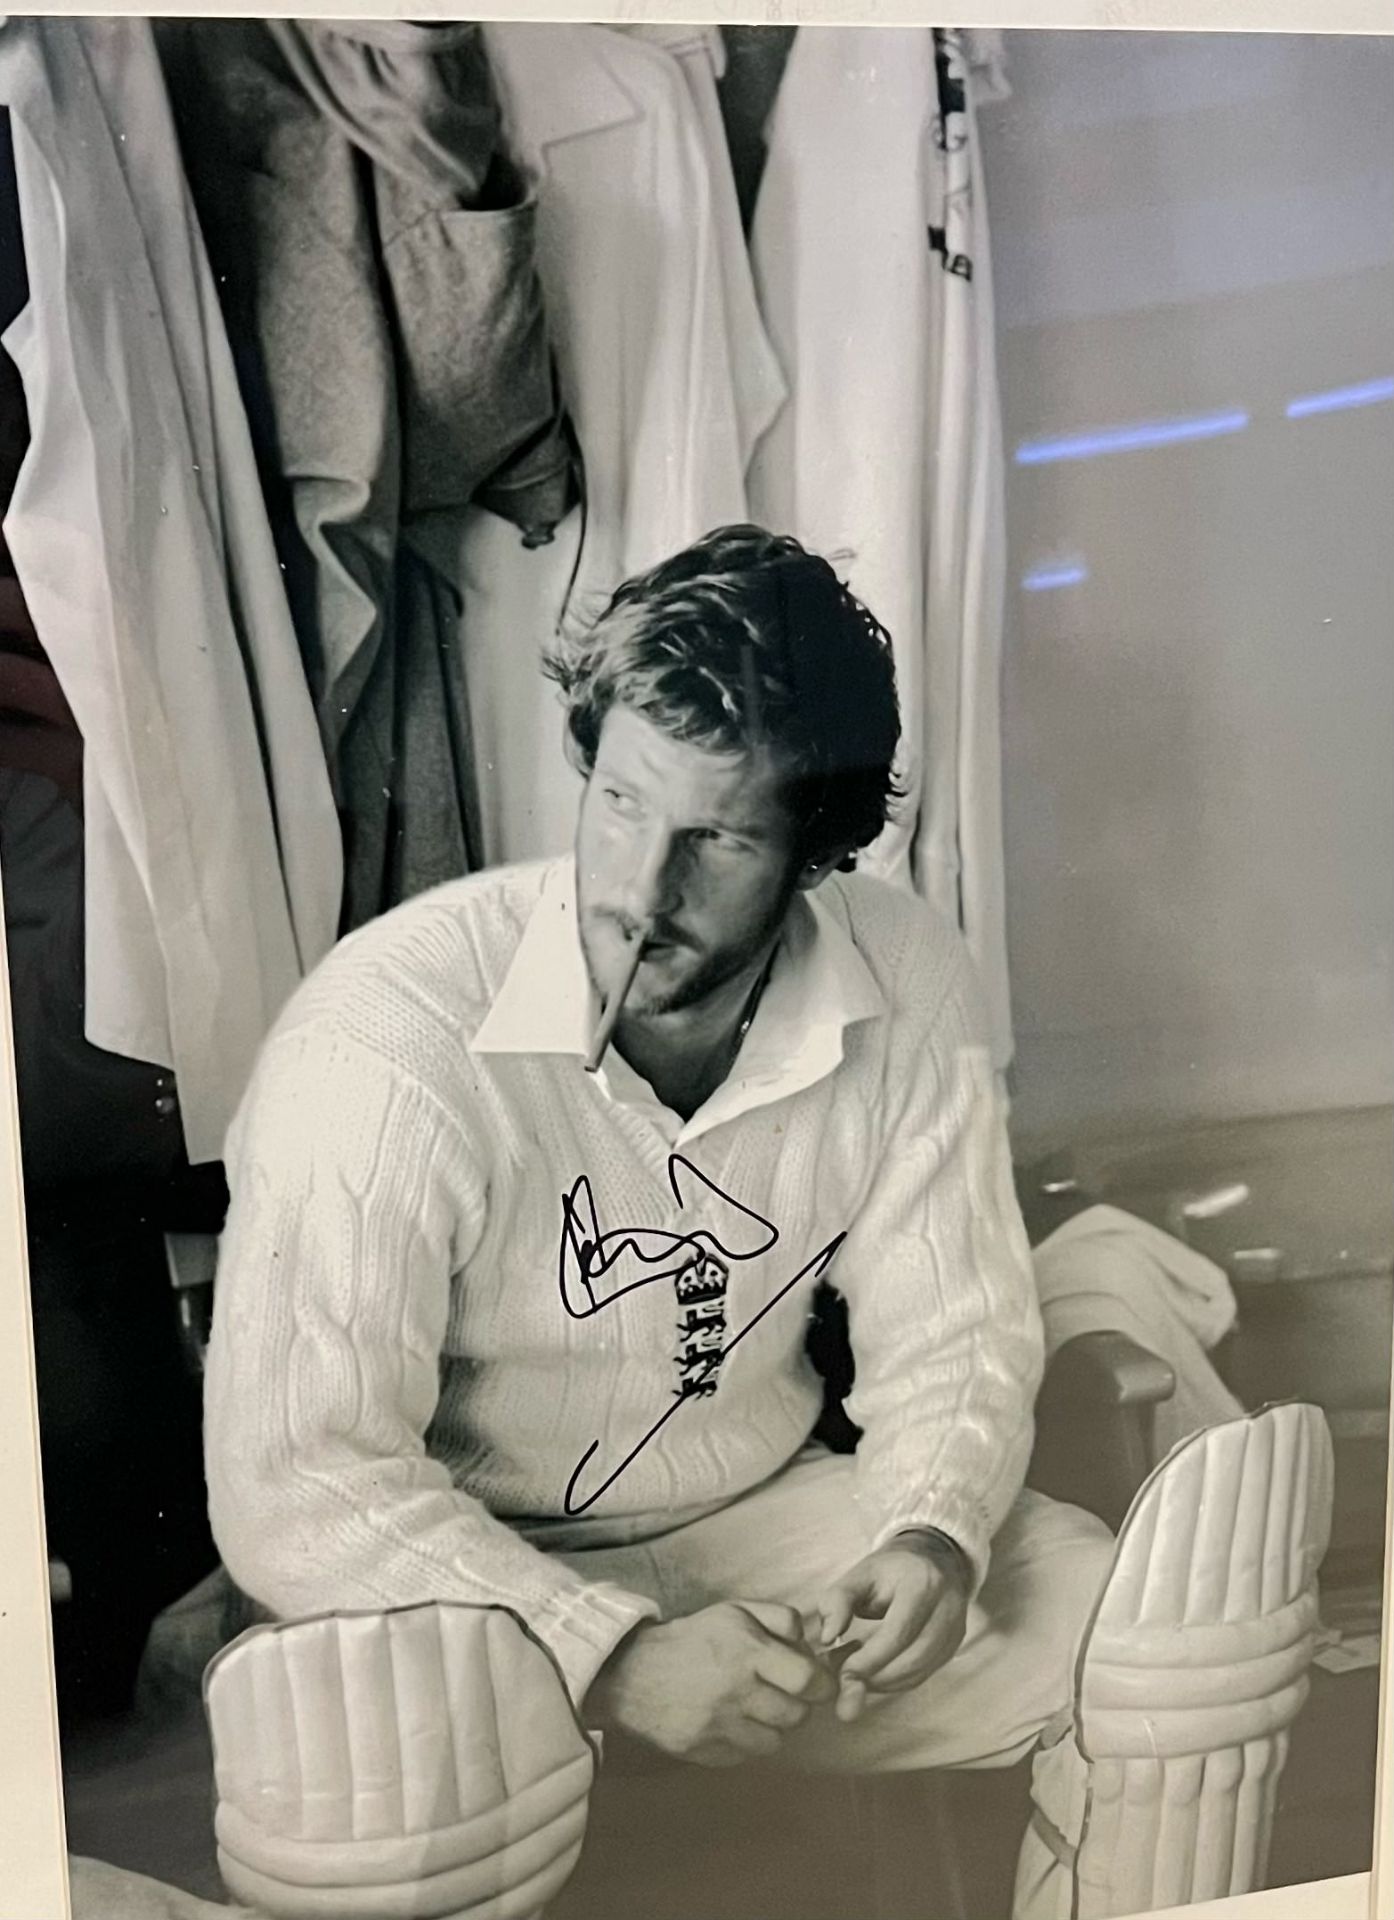 Authentic Sir Ian Botham Signed Photo: Dressing Room Cigar Break - This famous photo shows Sir Ian